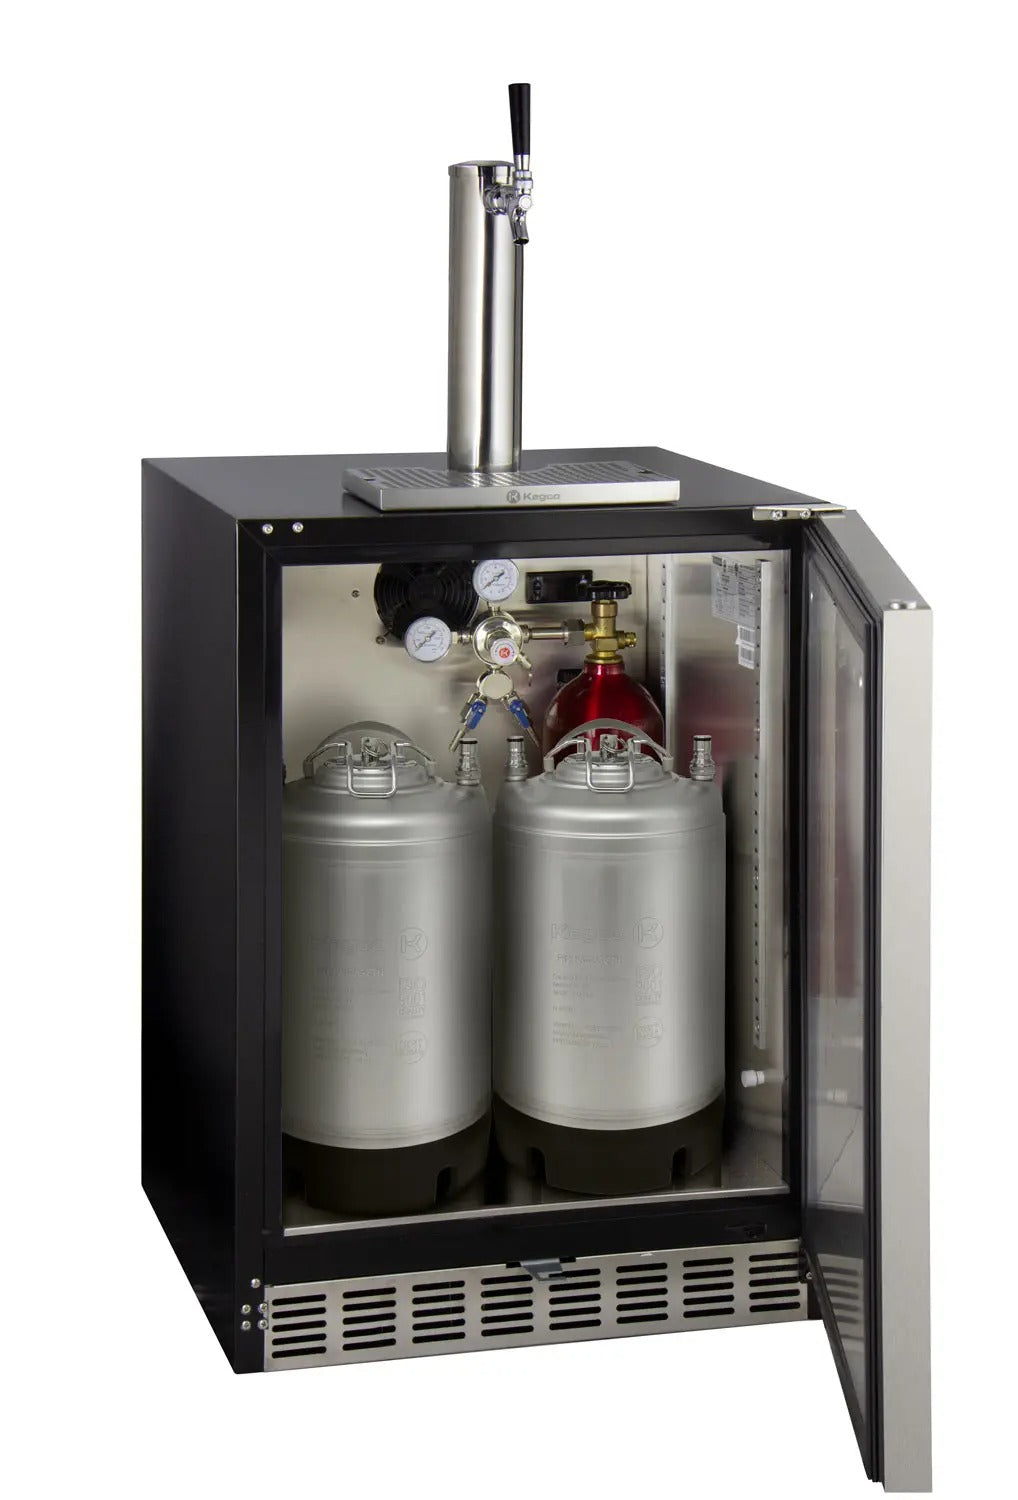 Kegco 24" Wide Single Tap Stainless Steel Built-In Right Hinge ADA Kegerator - Cabinet Only